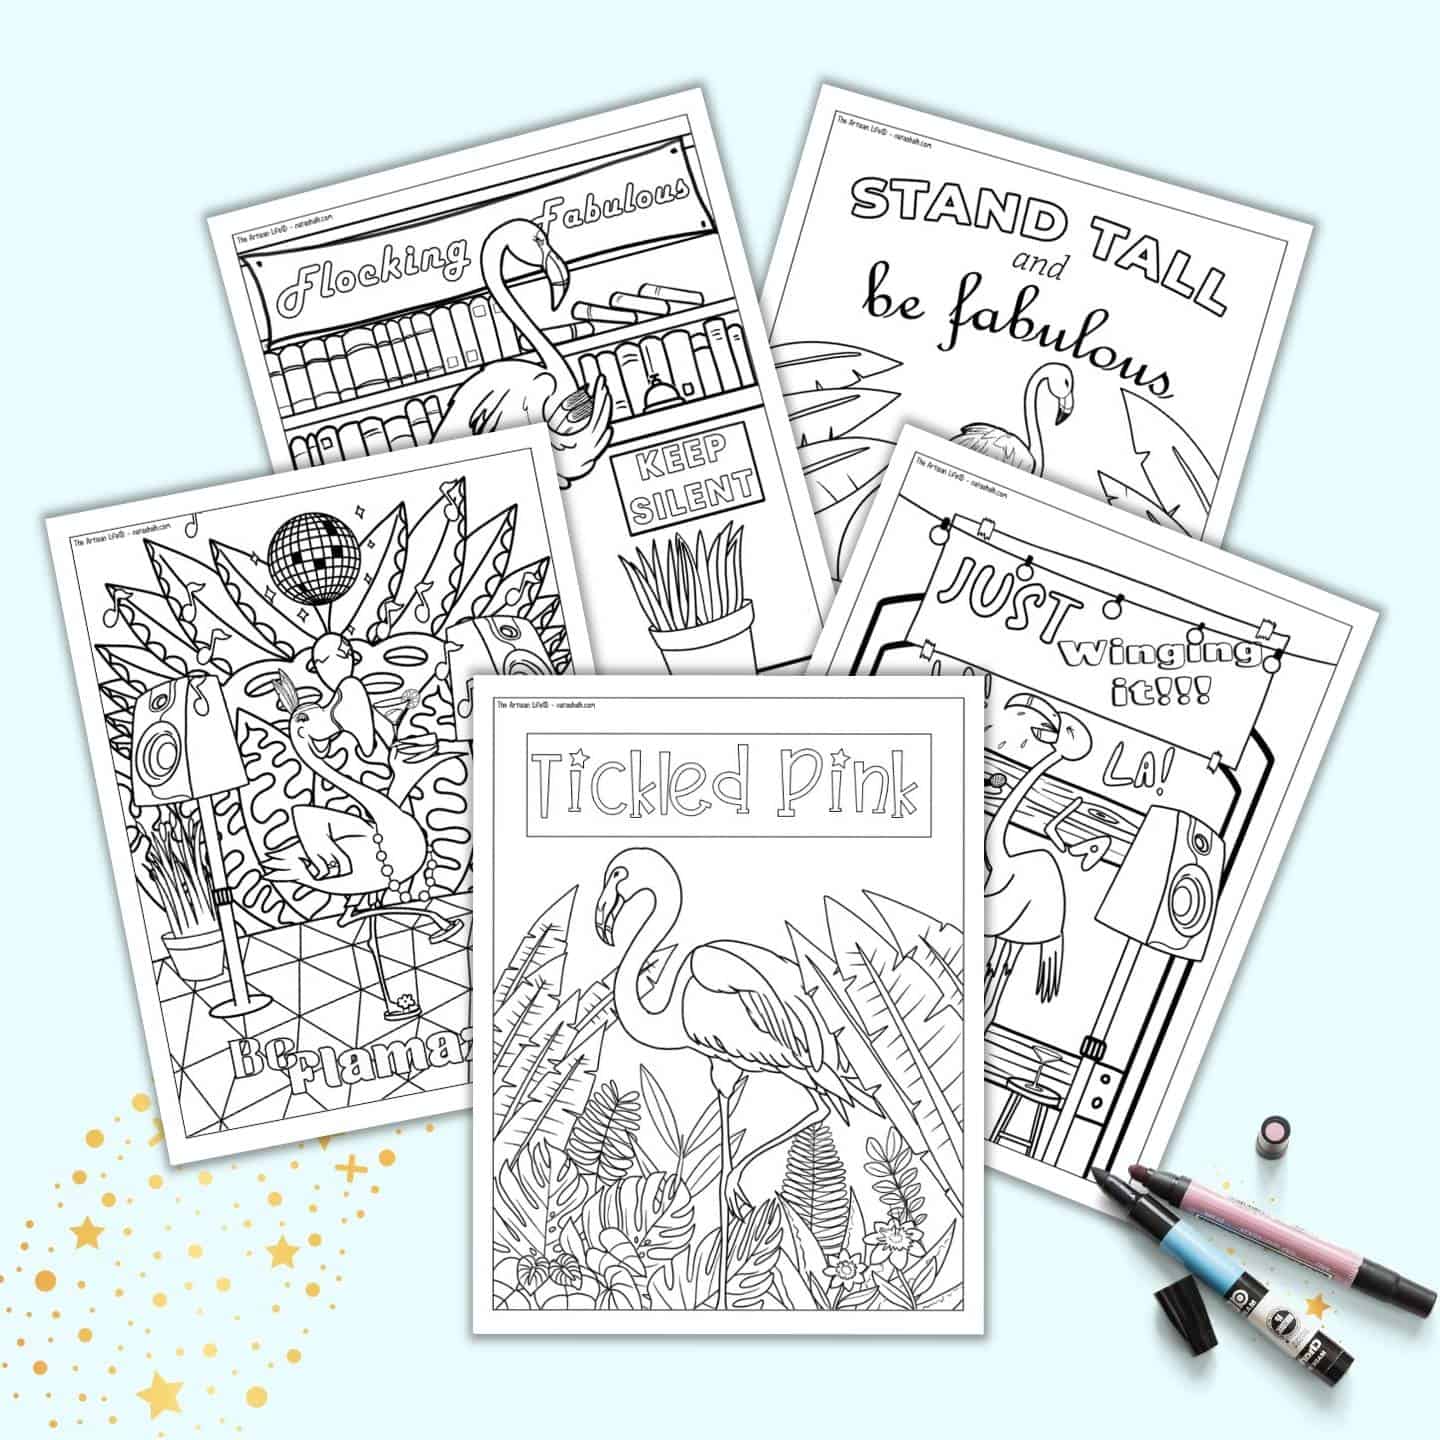 https://natashalh.com/wp-content/uploads/2021/08/flamingo-coloring-pages-for-adults-free-printables.jpg